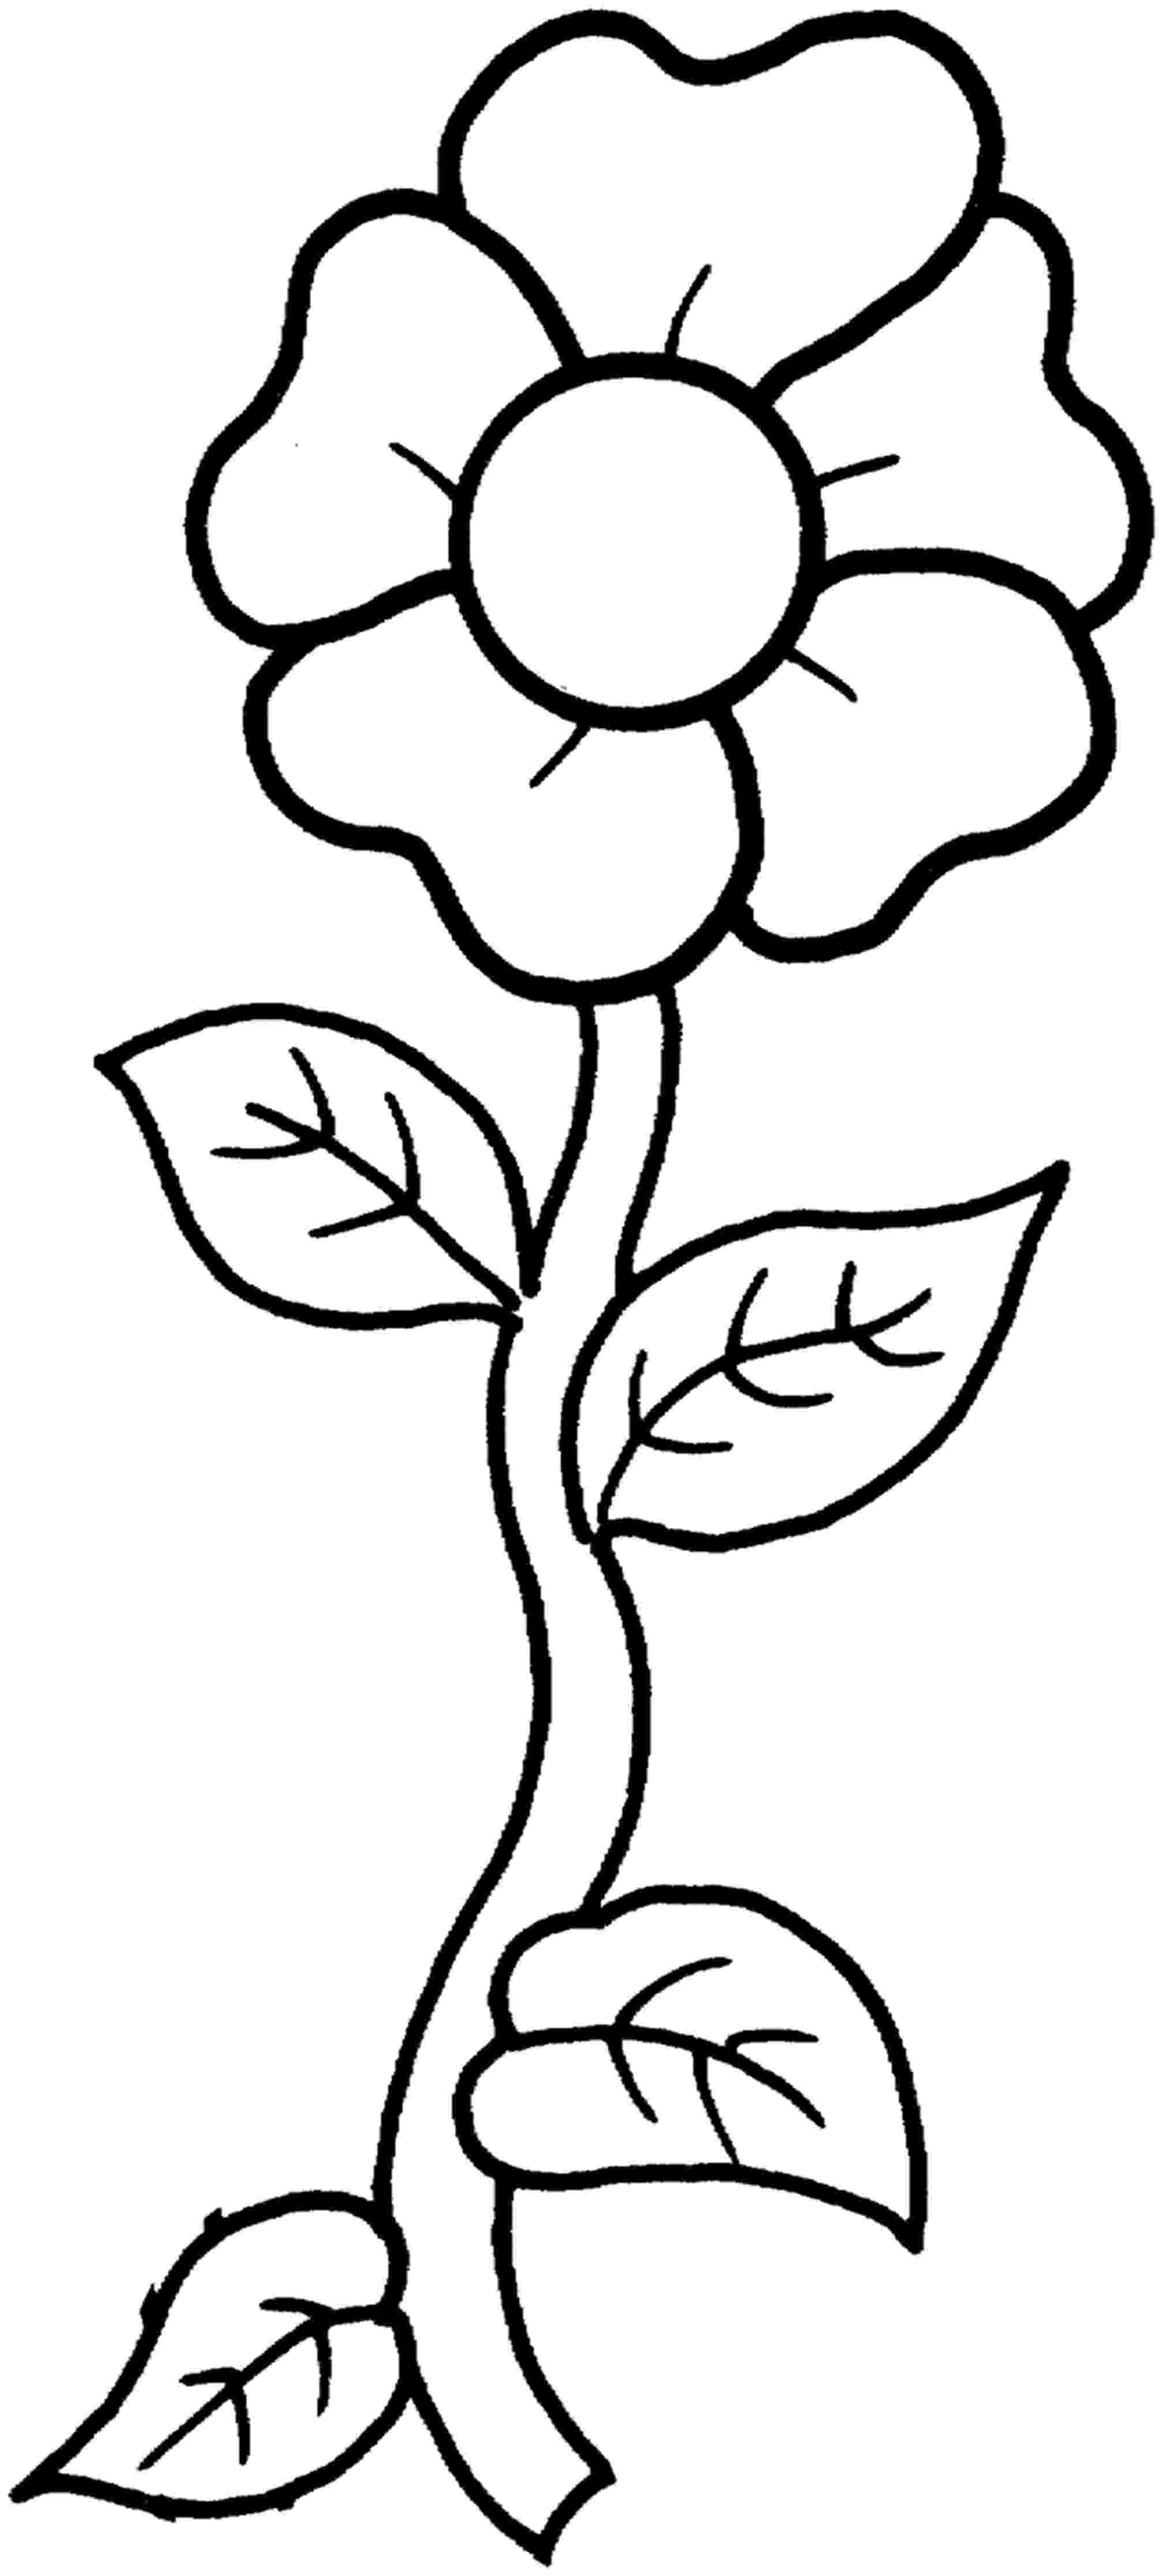 coloring page of flower free printable flower coloring pages for kids cool2bkids coloring page flower of 